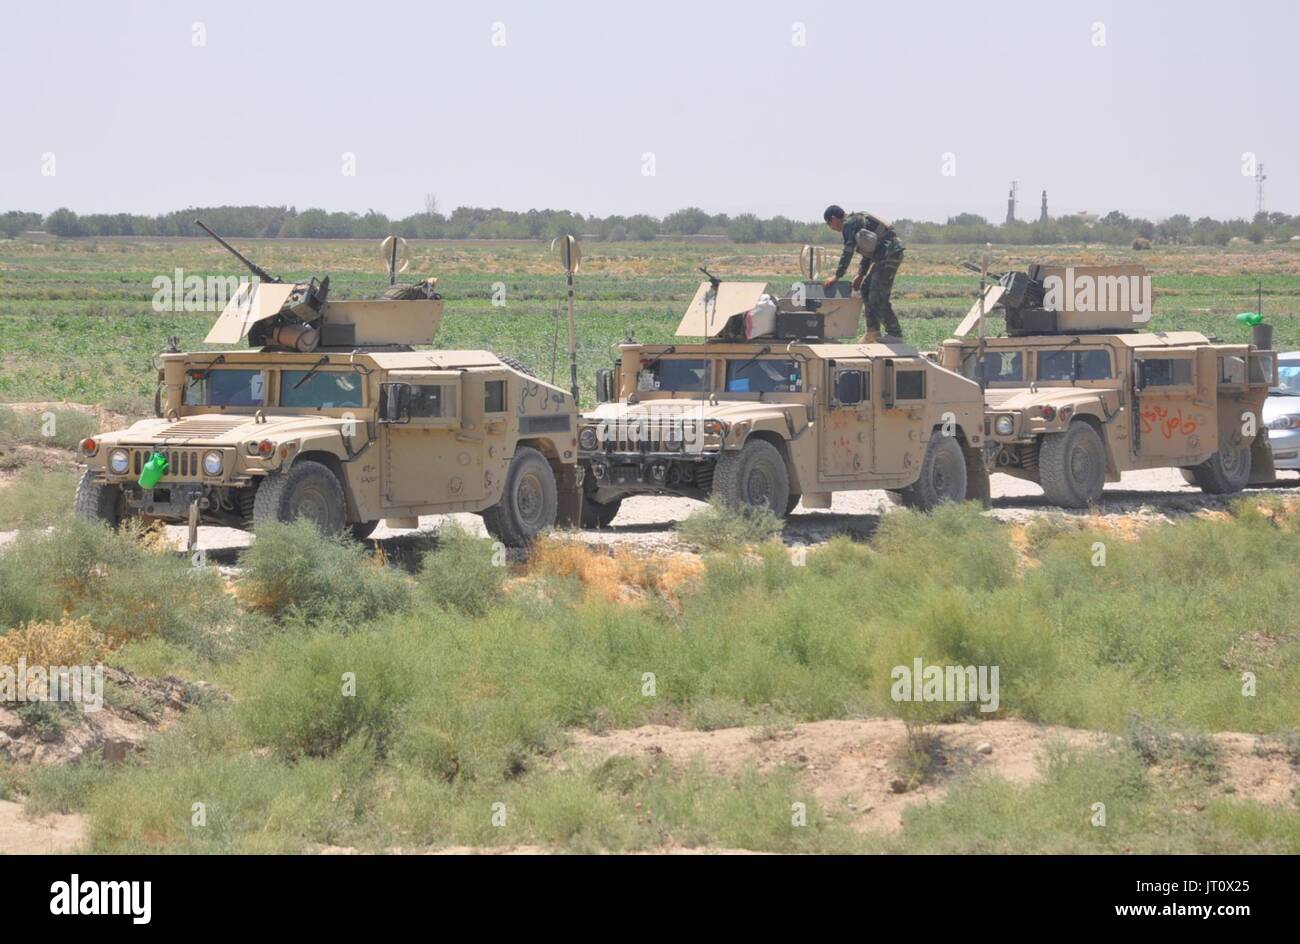 Shiberghan, Afghanistan. 6th Aug, 2017. Photo taken on Aug. 6, 2017 shows Afghan military vehicles during a military operation in Aqcha district of Jawzjan province, Afghanistan, Aug. 6, 2017. As many as 12 militants have been killed in separate incidents in two northern Afghan provinces, officials said on Sunday. Fighting has escalated as the Taliban insurgency spread from its traditional strongholds in southern and eastern Afghanistan to the once peaceful northern region, where Taliban have been recruiting from the youths. Credit: Mohammad Jan Aria/Xinhua/Alamy Live News Stock Photo